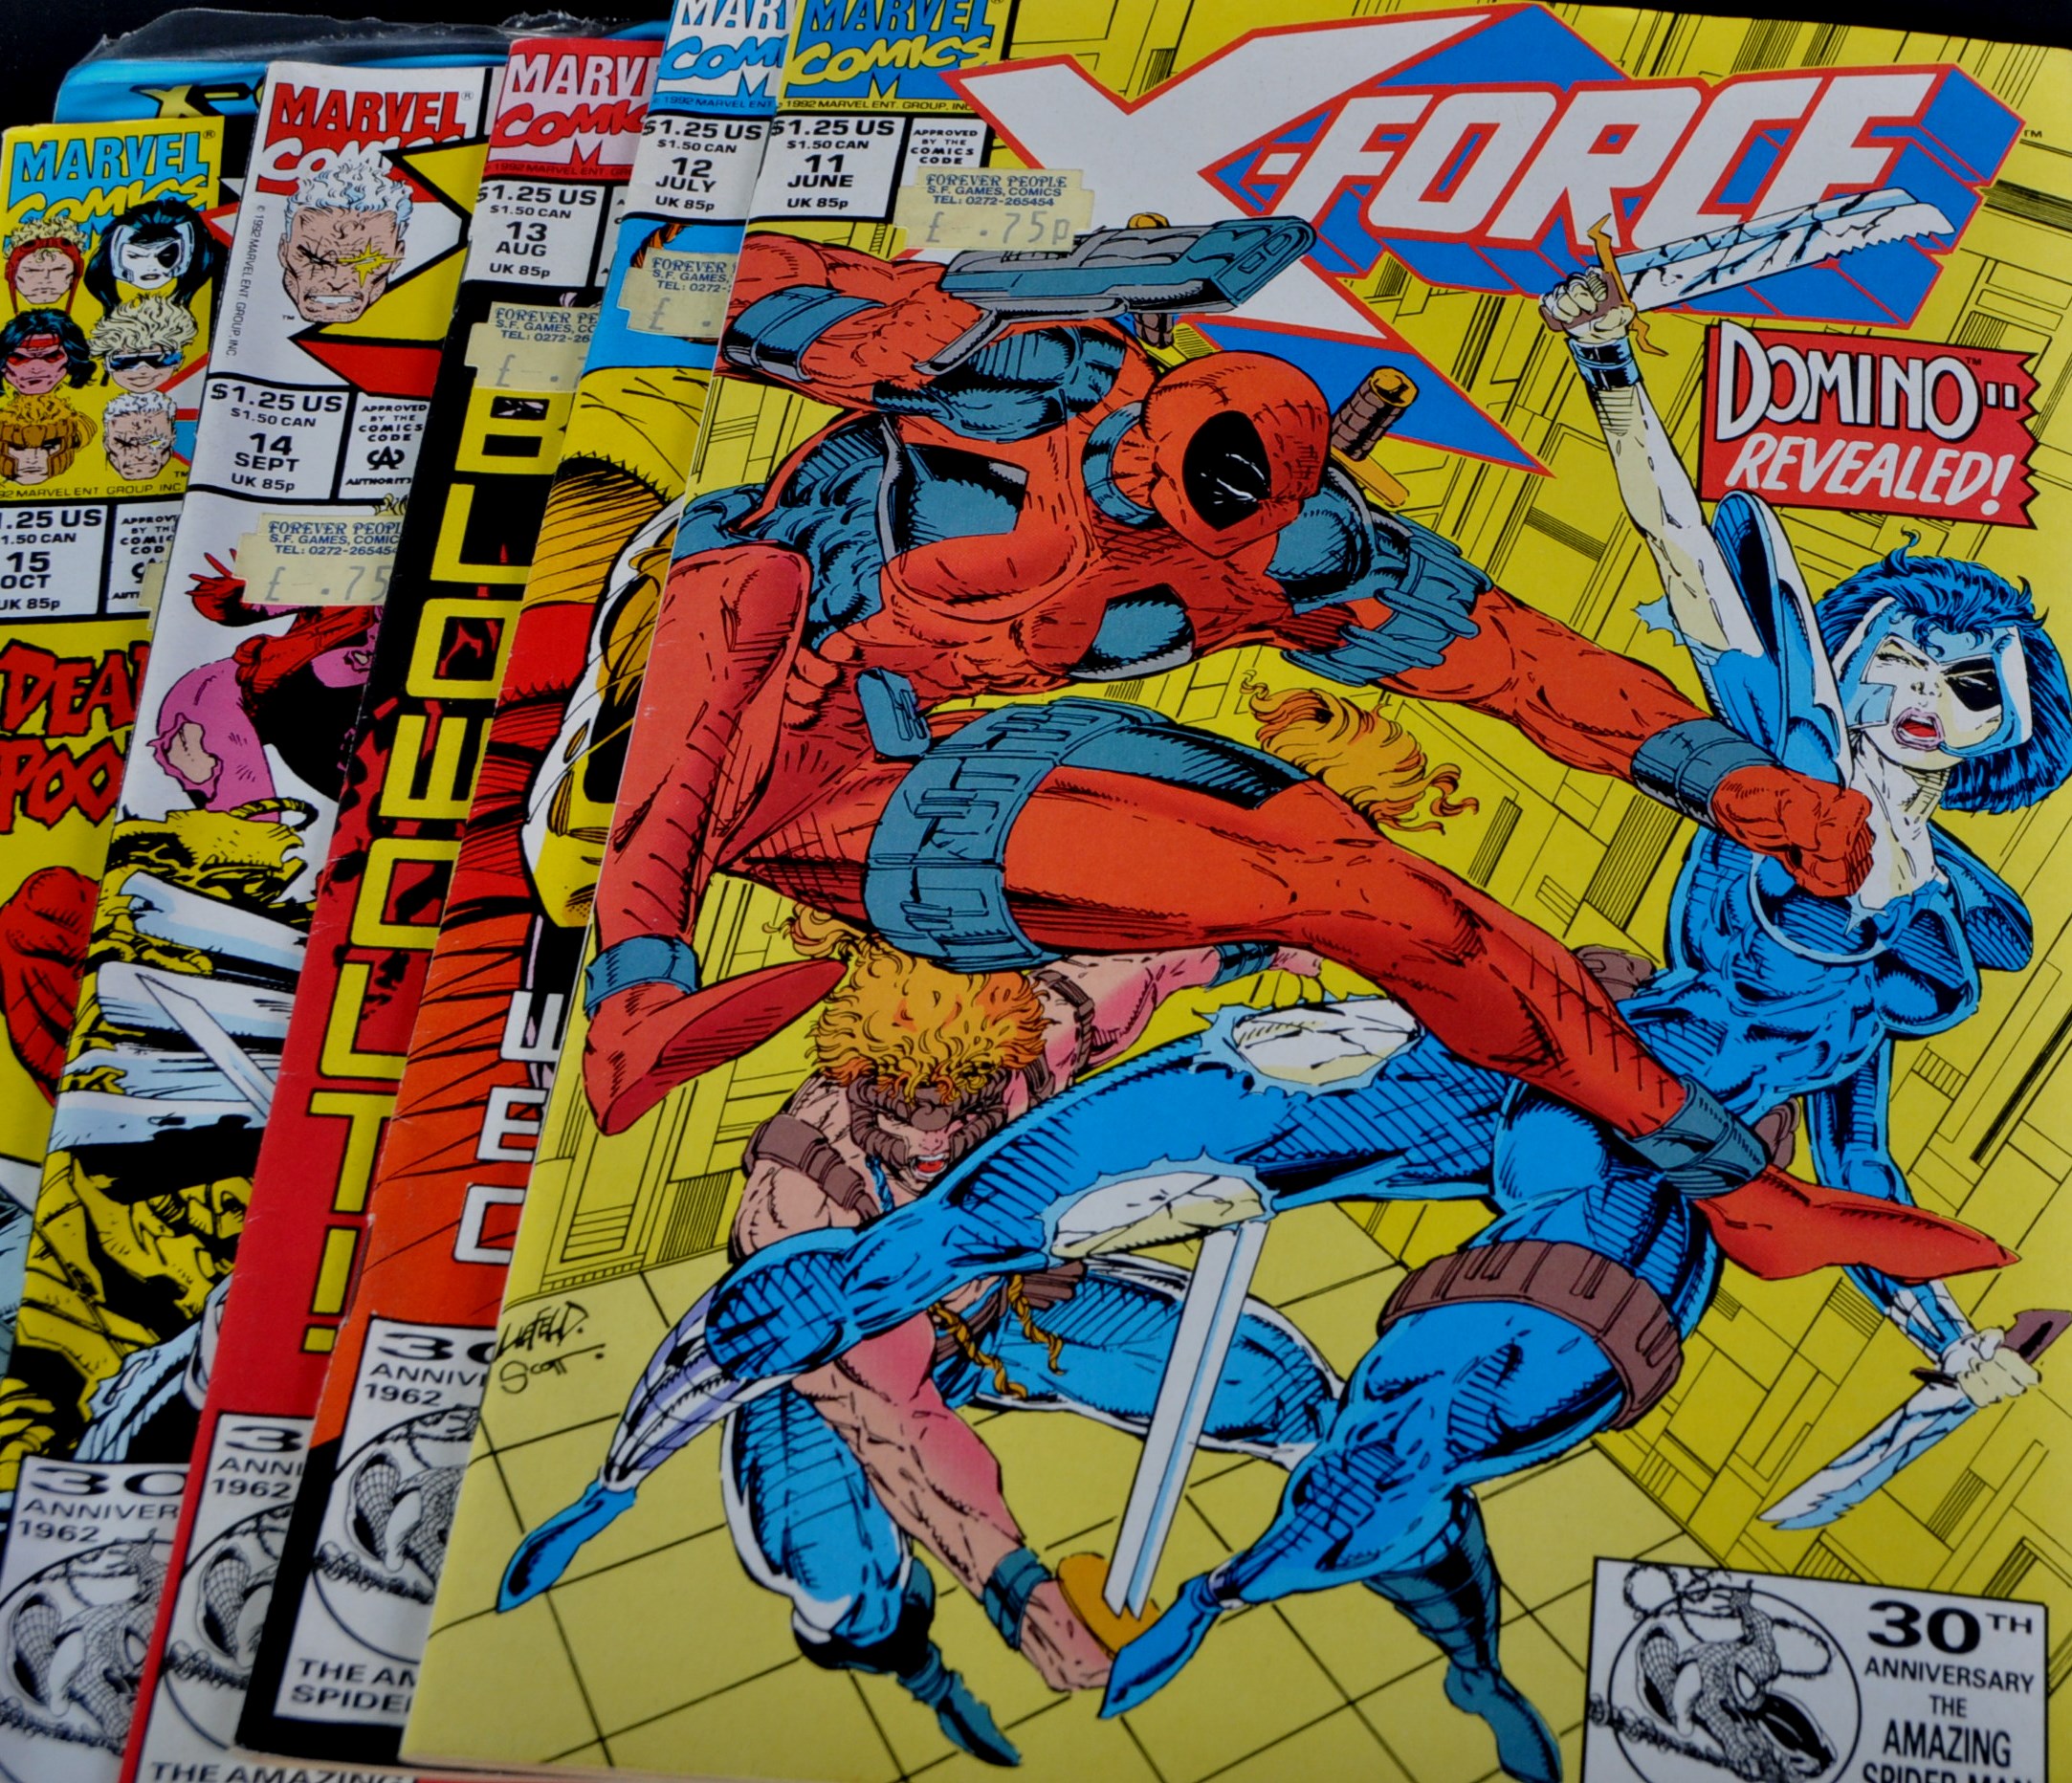 MARVEL COMICS - X-FORCE - COLLECTION OF COMIC BOOKS - Image 5 of 5